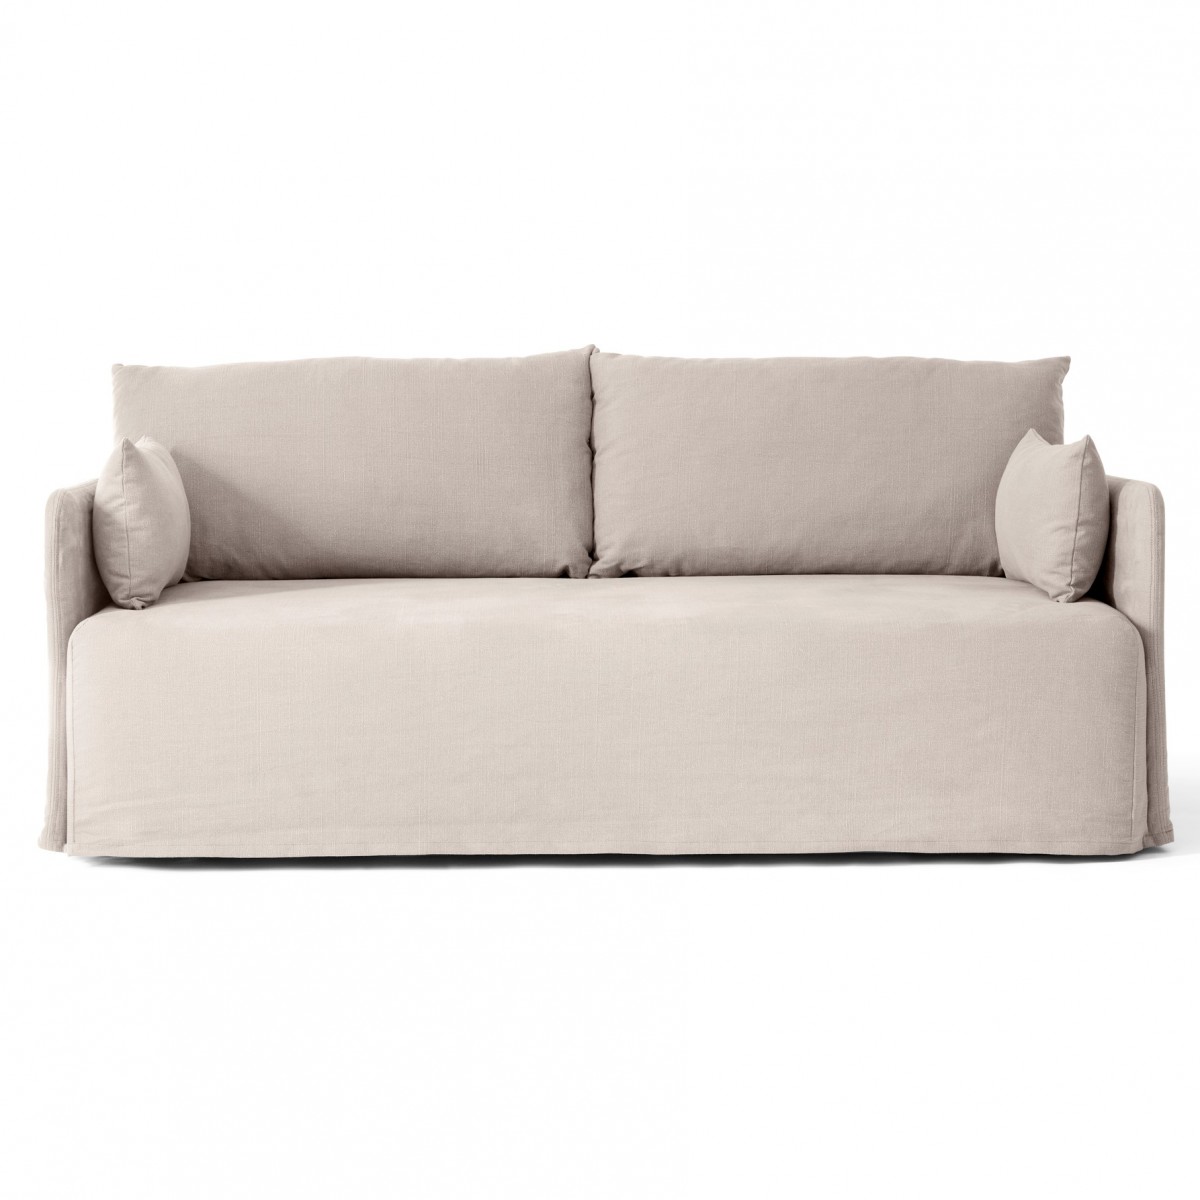 Offset Sofa with Loose Cover, 2 Seater